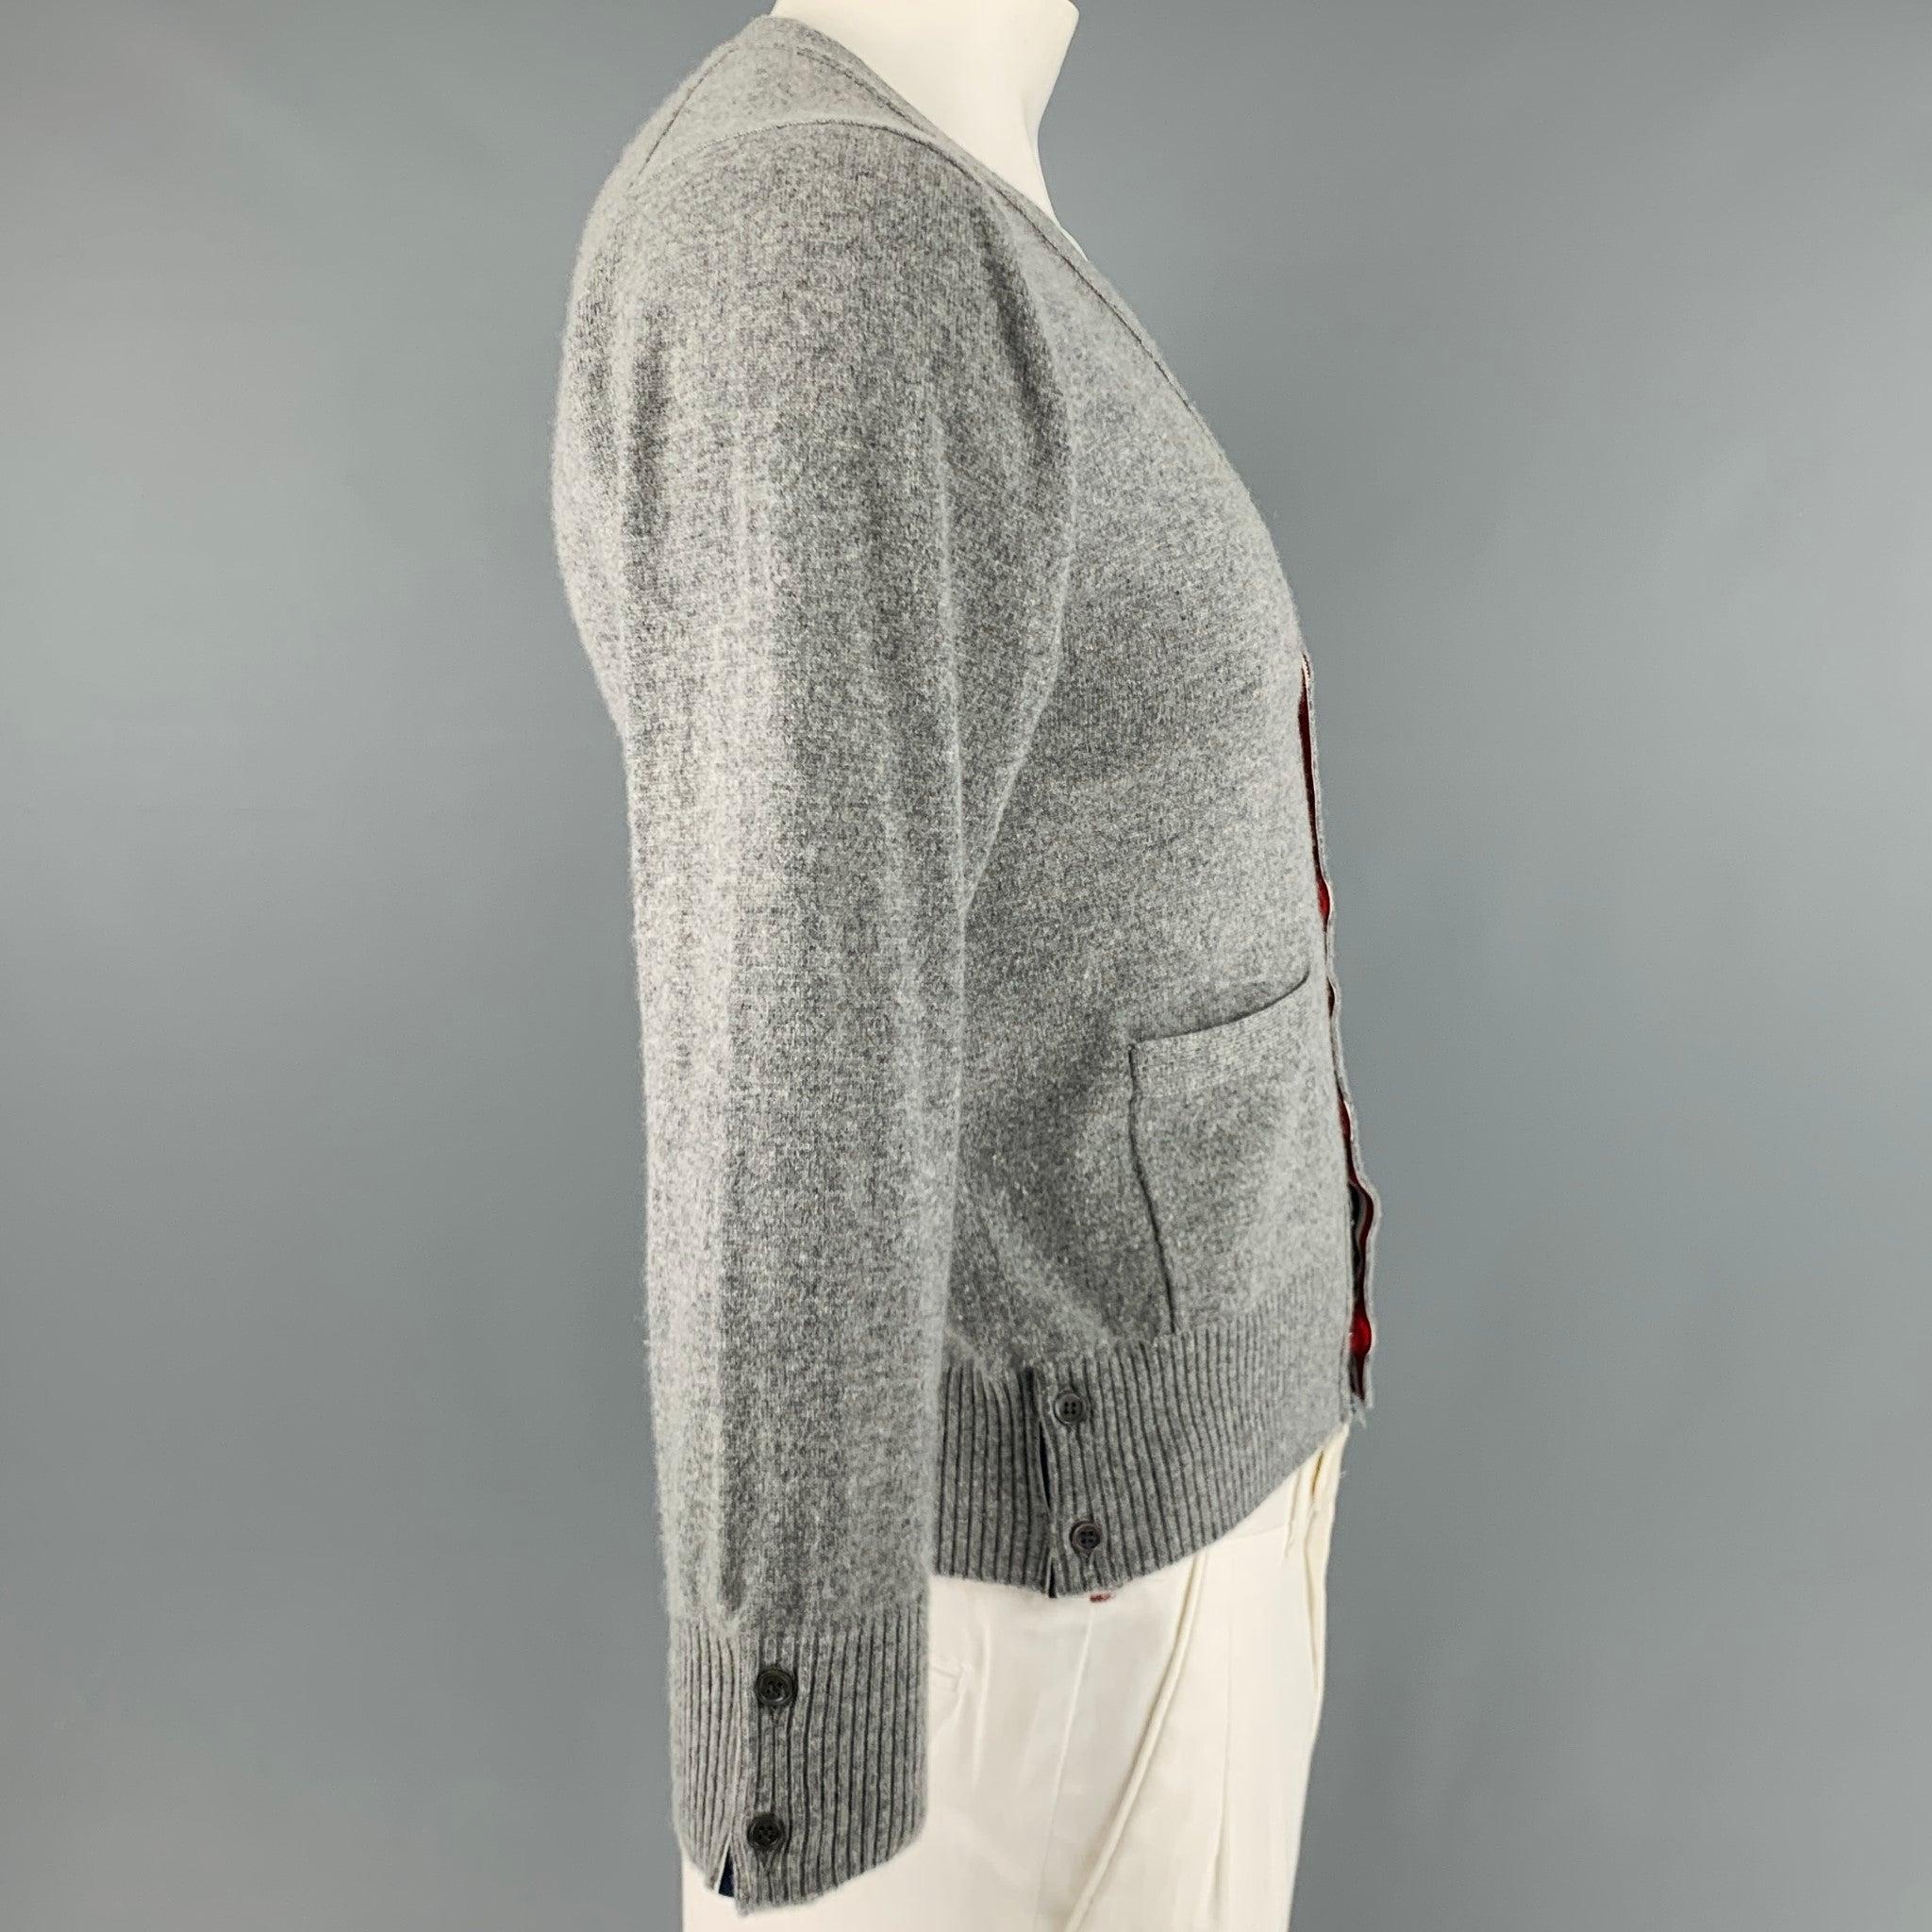 THOM BROWNE cardigan
in a grey cashmere knit featuring cream stripe arm detail, signature contrast button trim, button cuffs and hem, and button closure. Made in Italy.Very Good Pre-Owned Condition. Moderate pilling on sides and under arms.